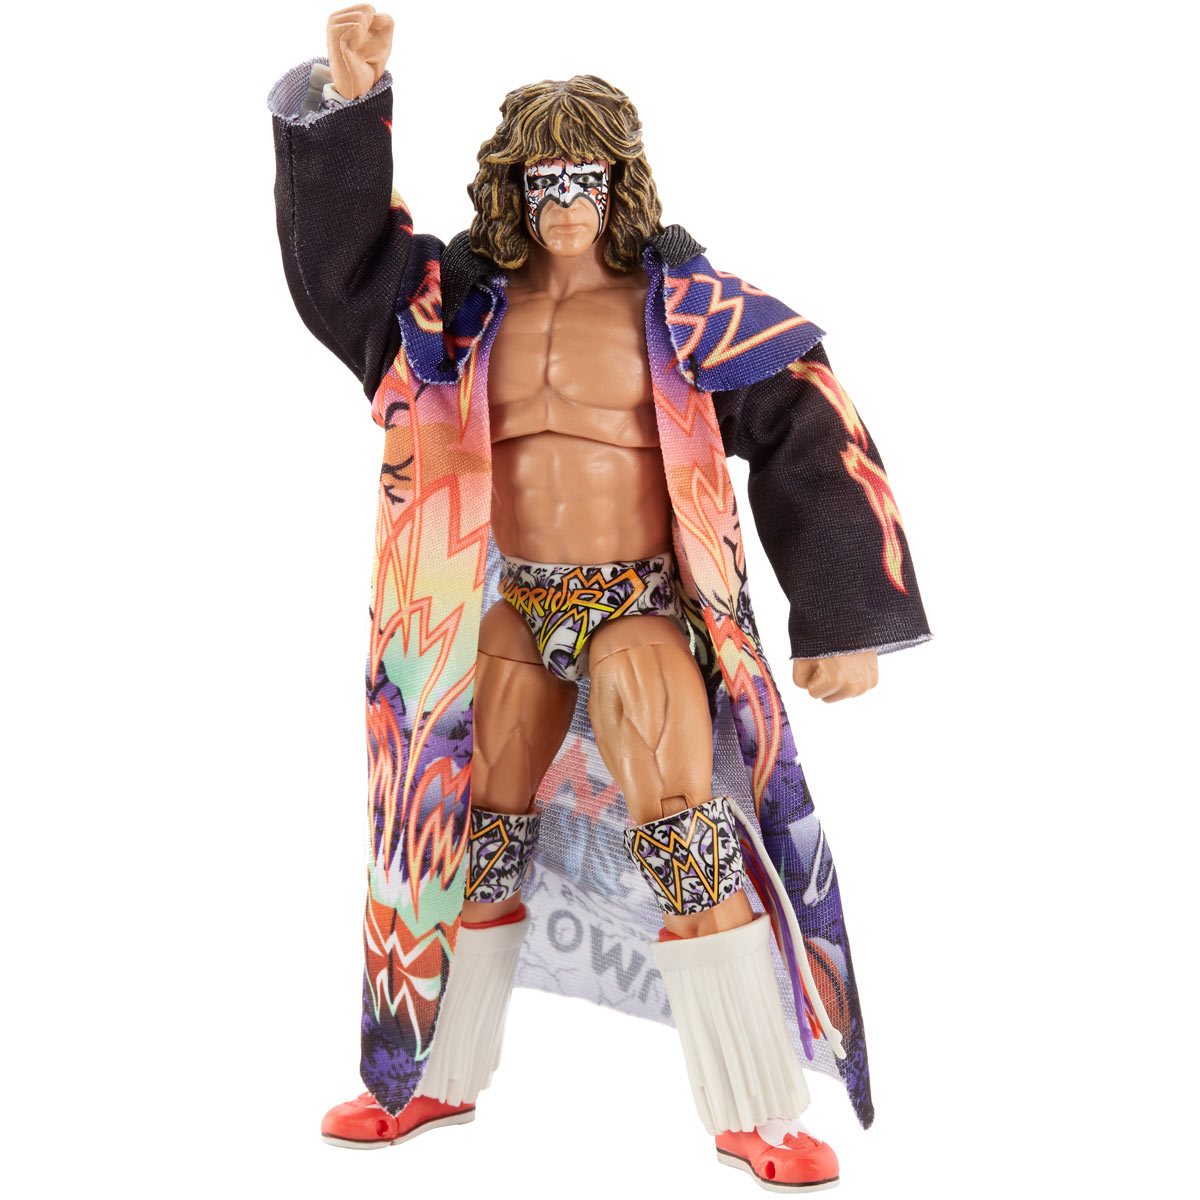 Ultimate warrior with one hannd up - Heretoserveyou